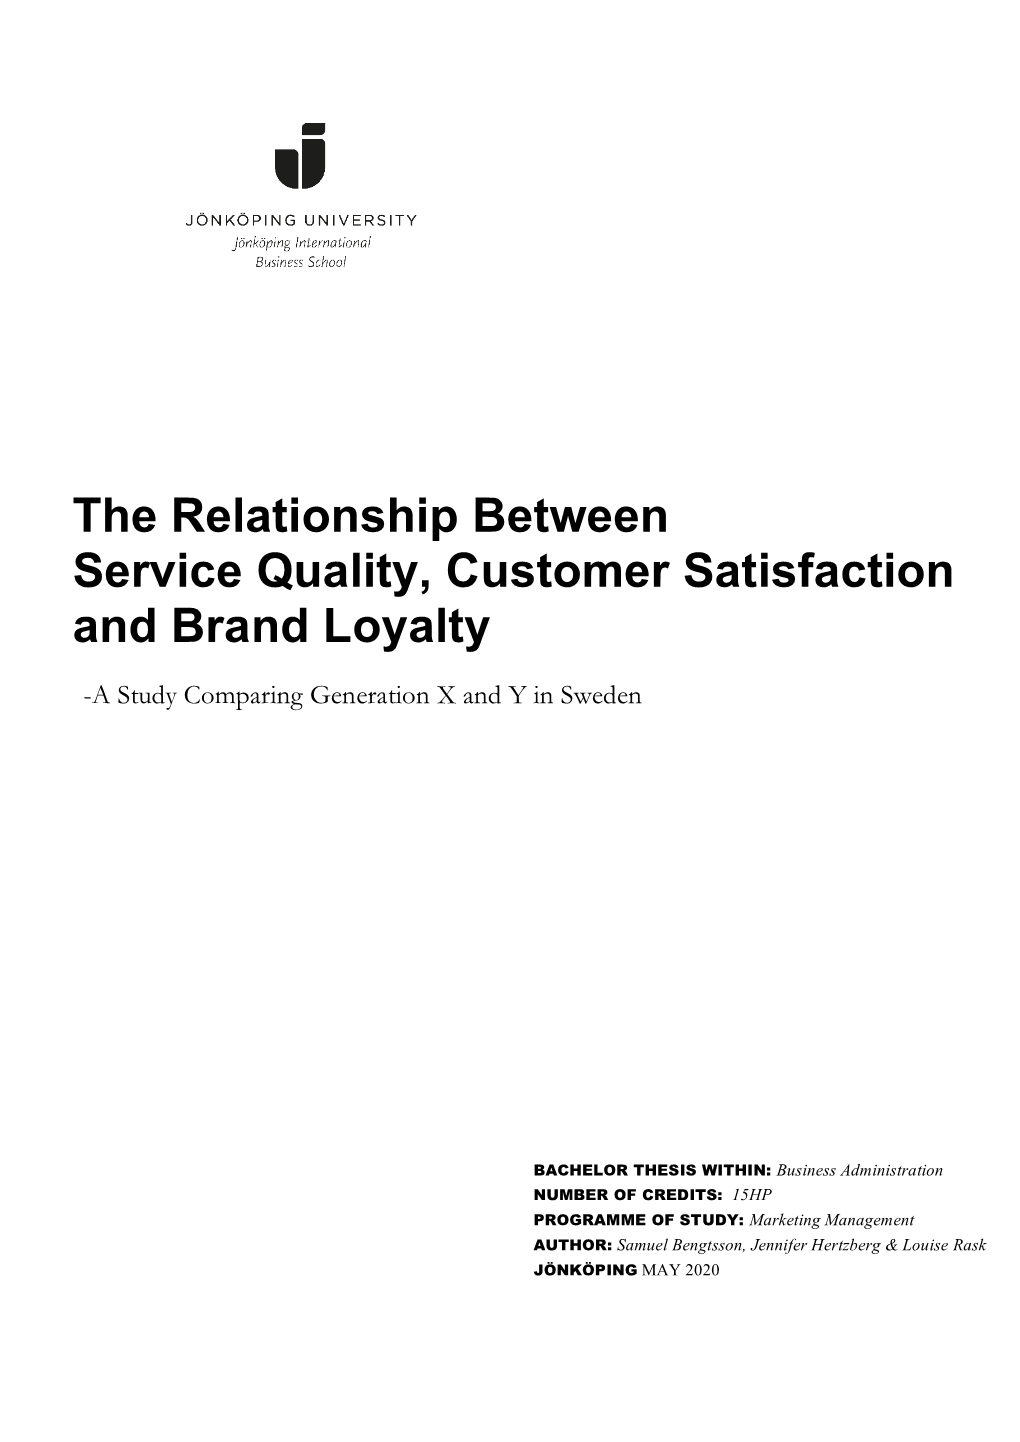 The Relationship Between Service Quality, Customer Satisfaction and Brand Loyalty